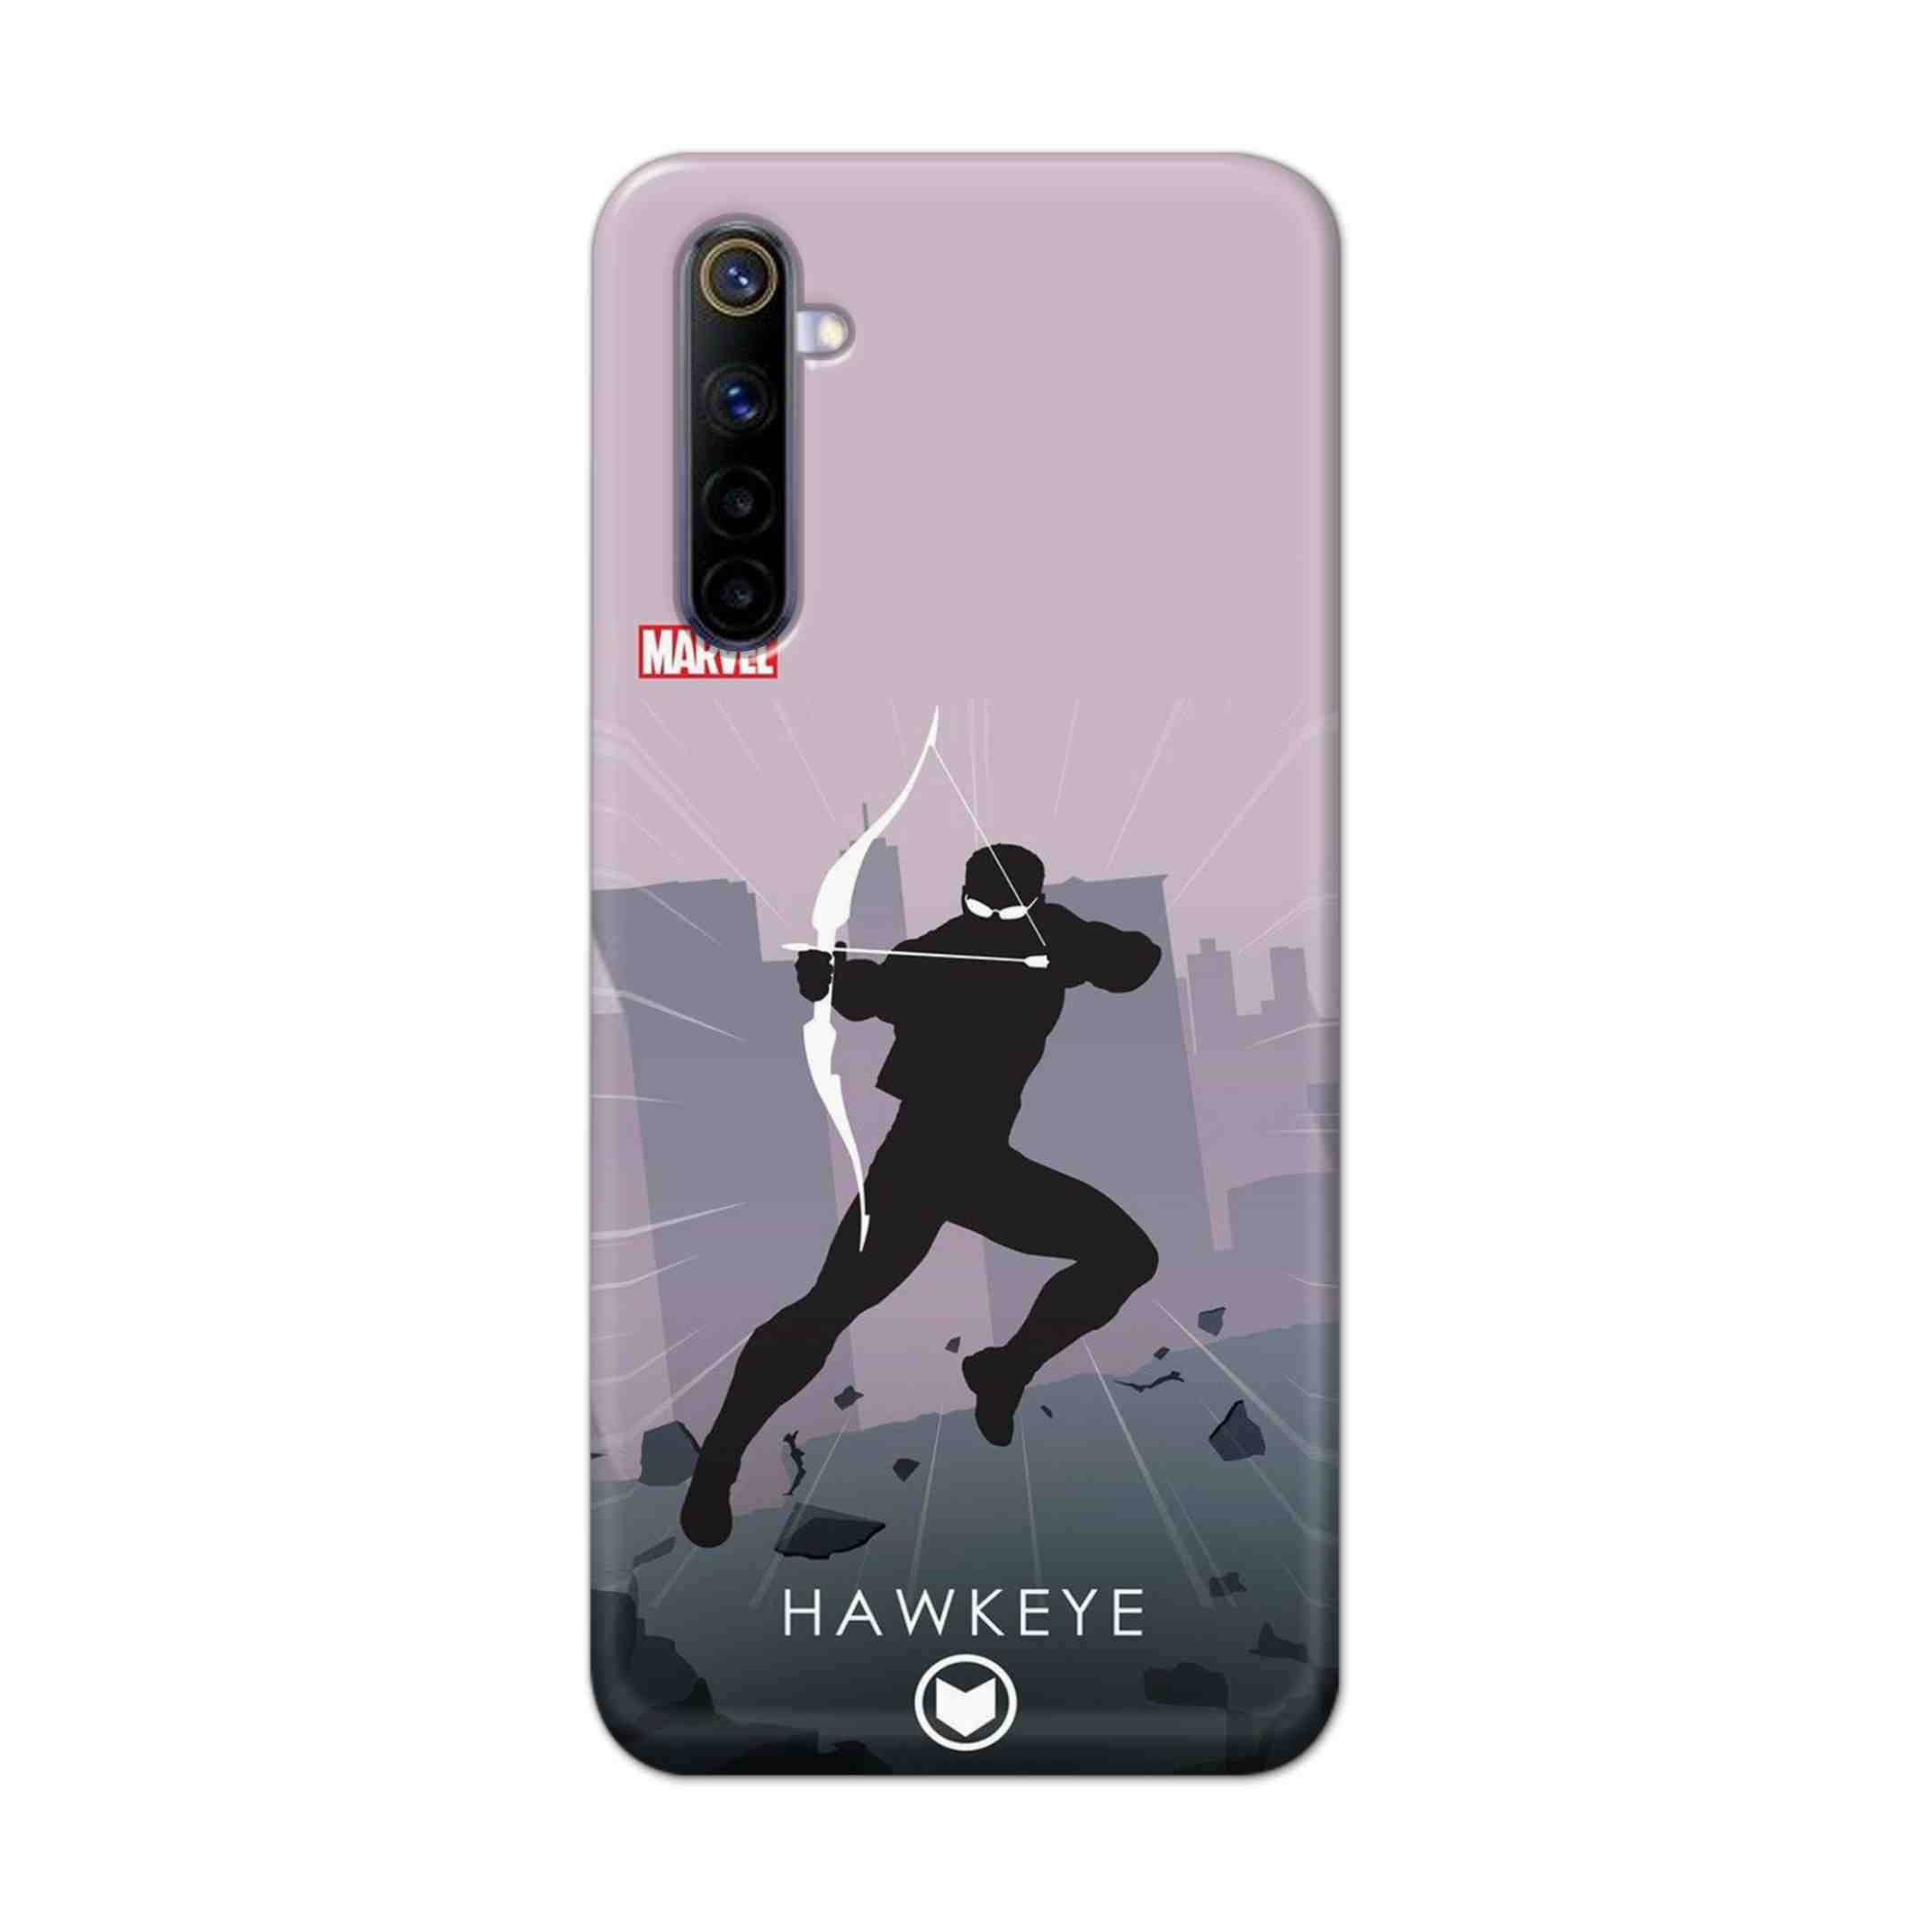 Buy Hawkeye Hard Back Mobile Phone Case Cover For REALME 6 PRO Online